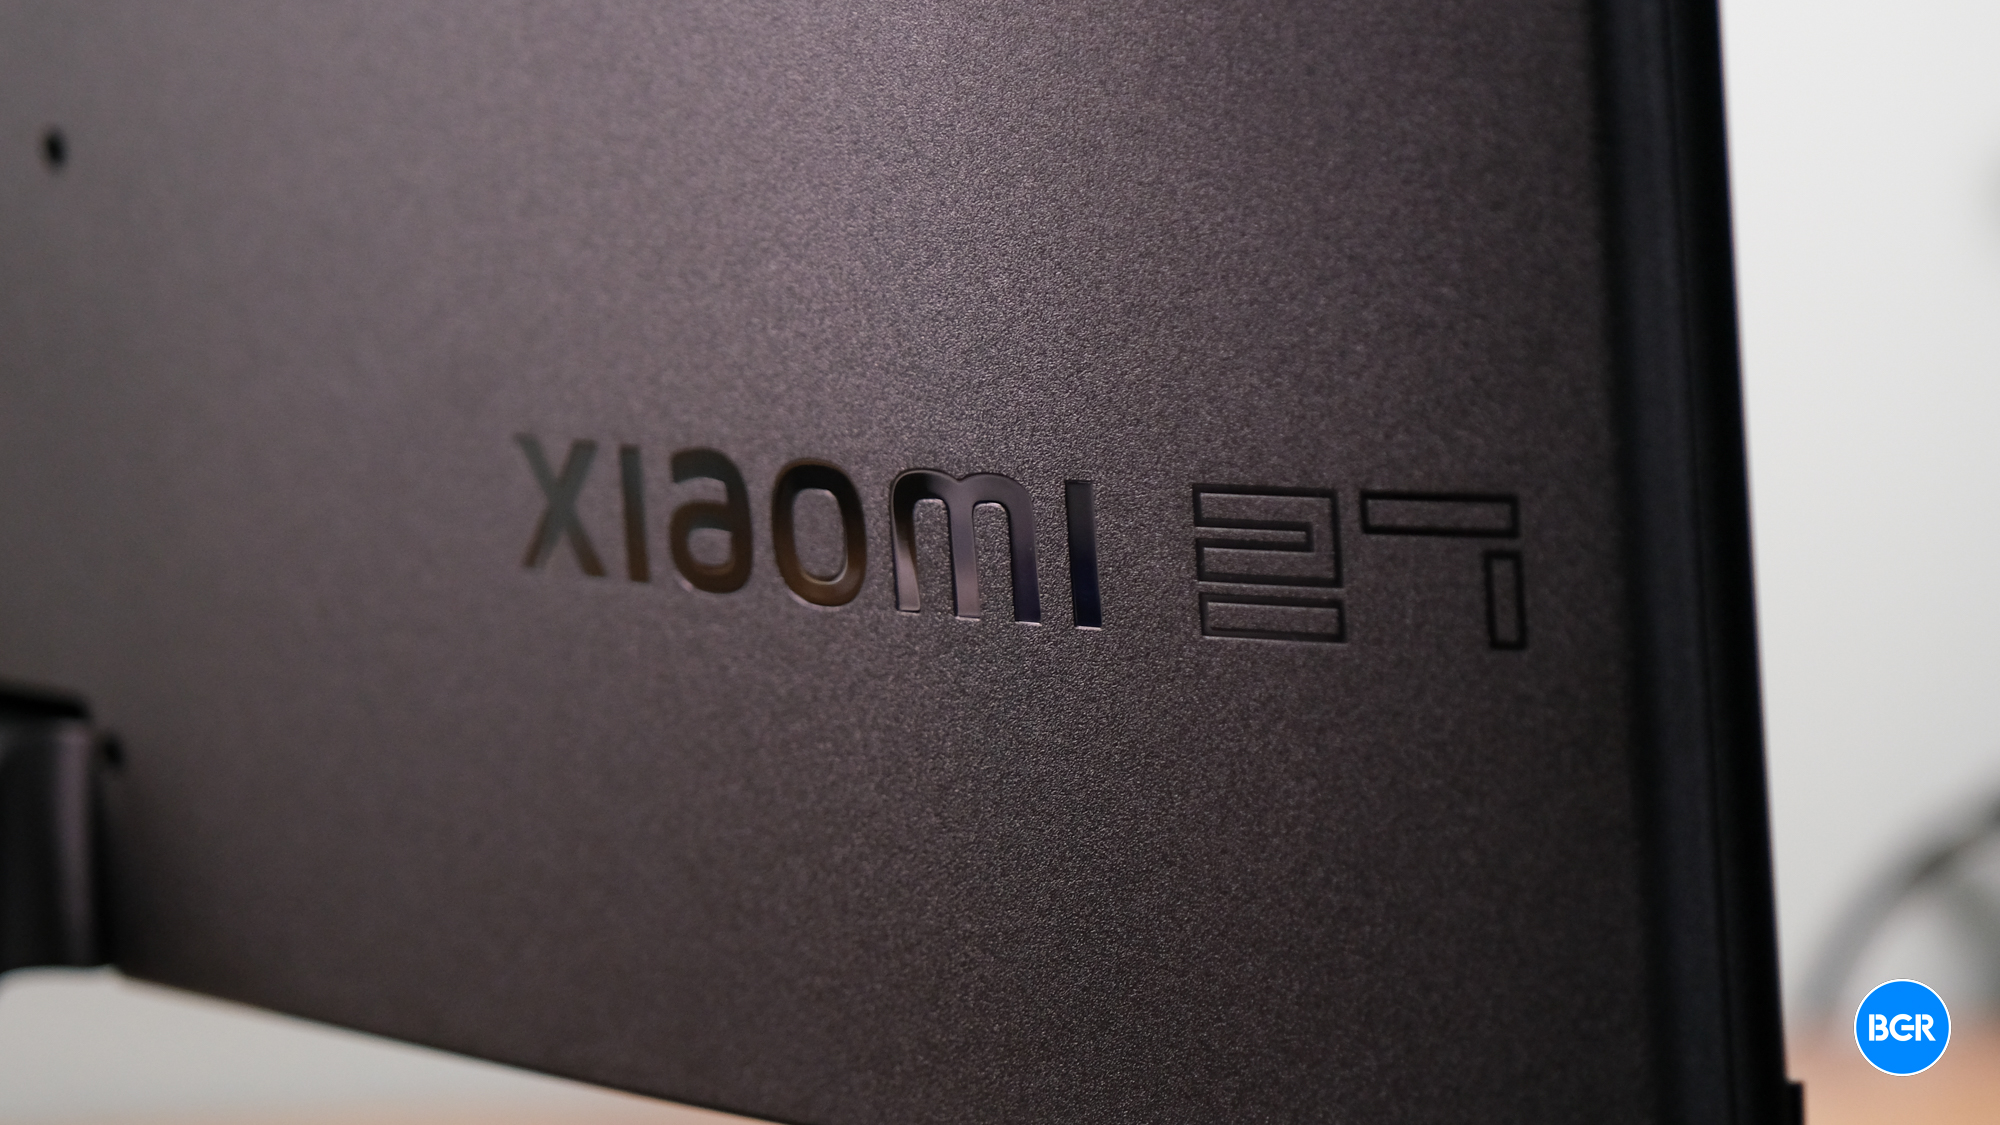 Xiaomi G27i logo on the back of the monitor